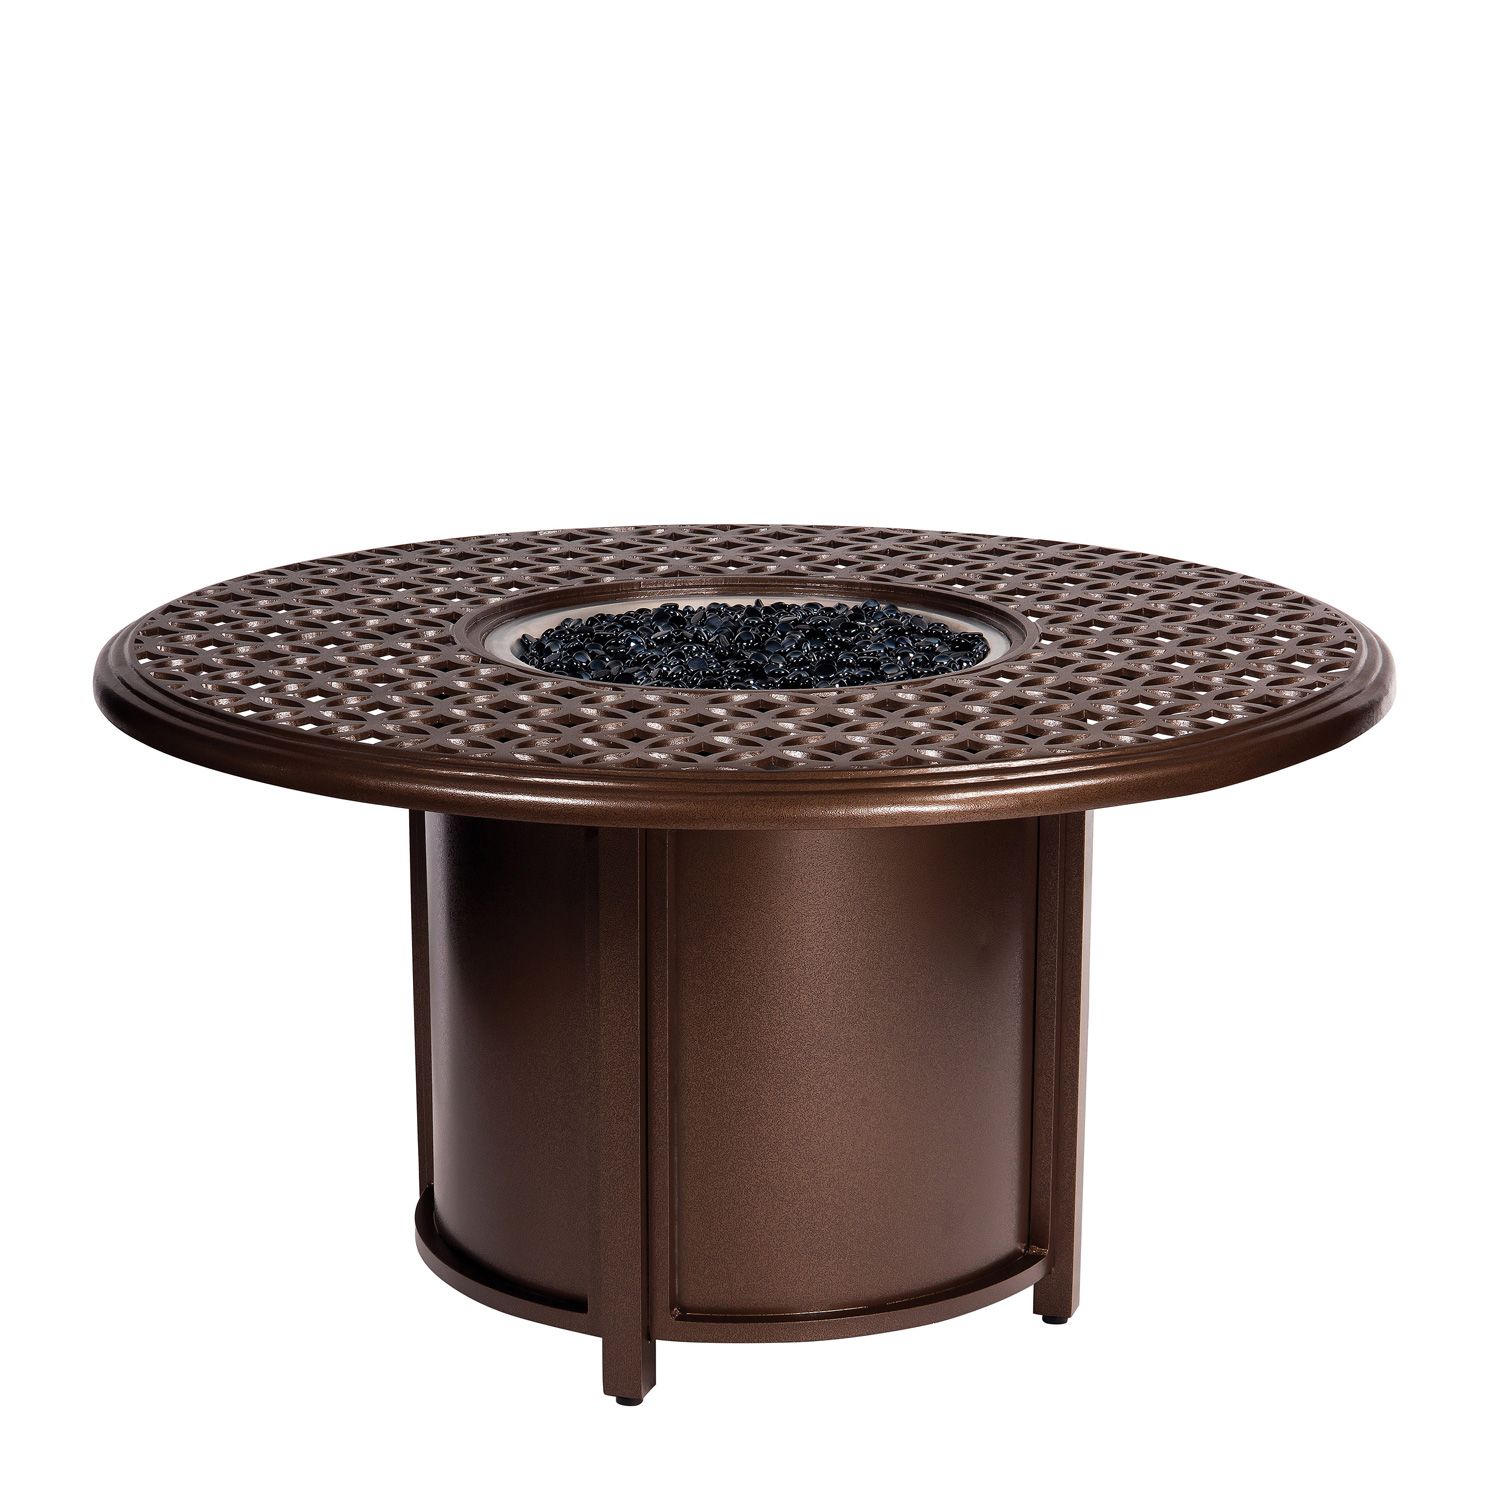 Casa Fire Round Chat Height Fire Table By Woodard